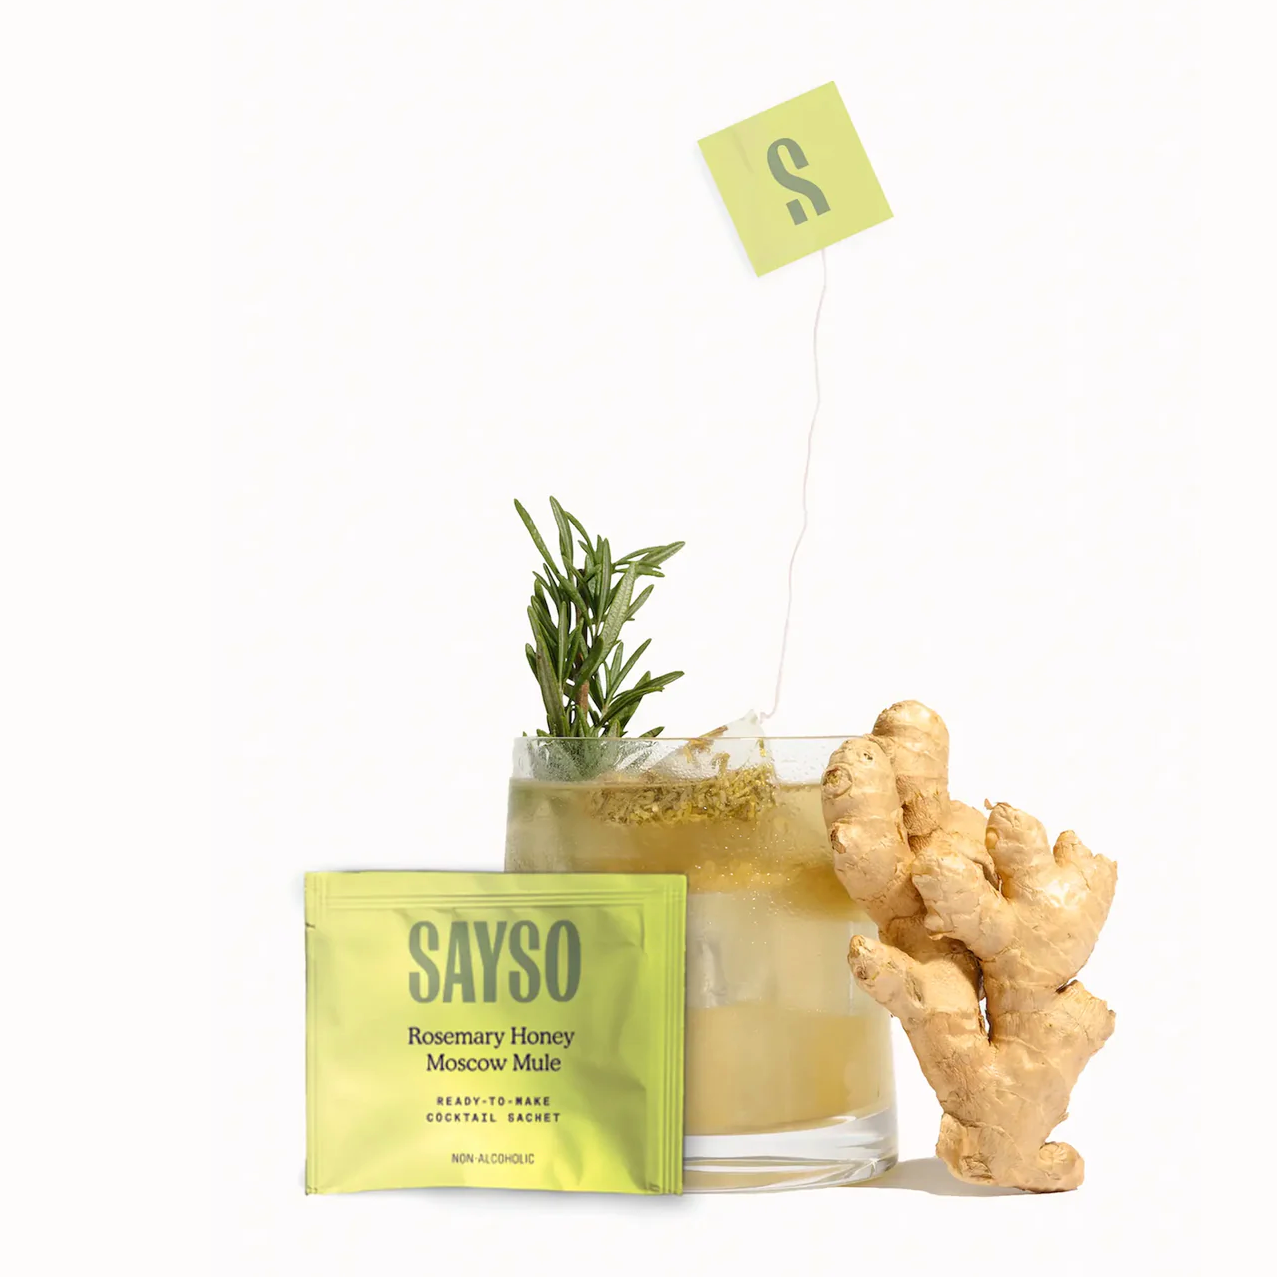 Image of the SAYSO Rosemary Honey Moscow Mule sachet, a moscow mule cocktail with the sachet soaking, and ginger root to the right.